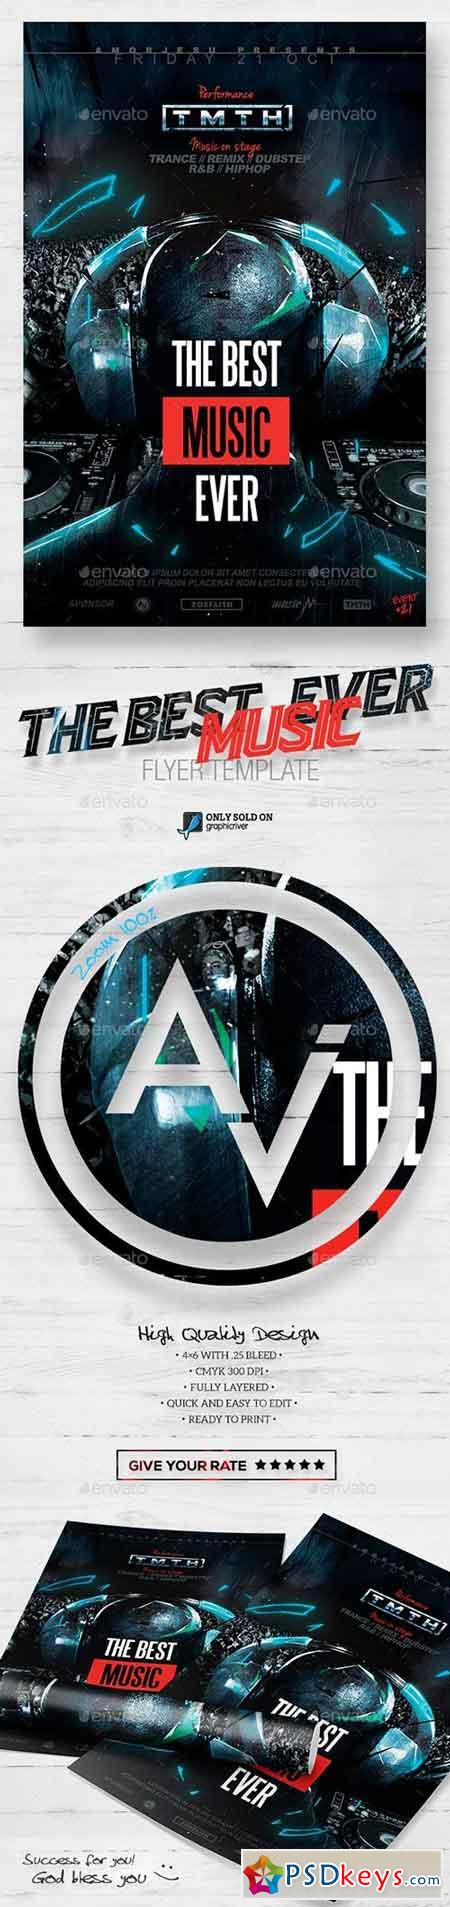 The Music Ever Flyer Template 15551998